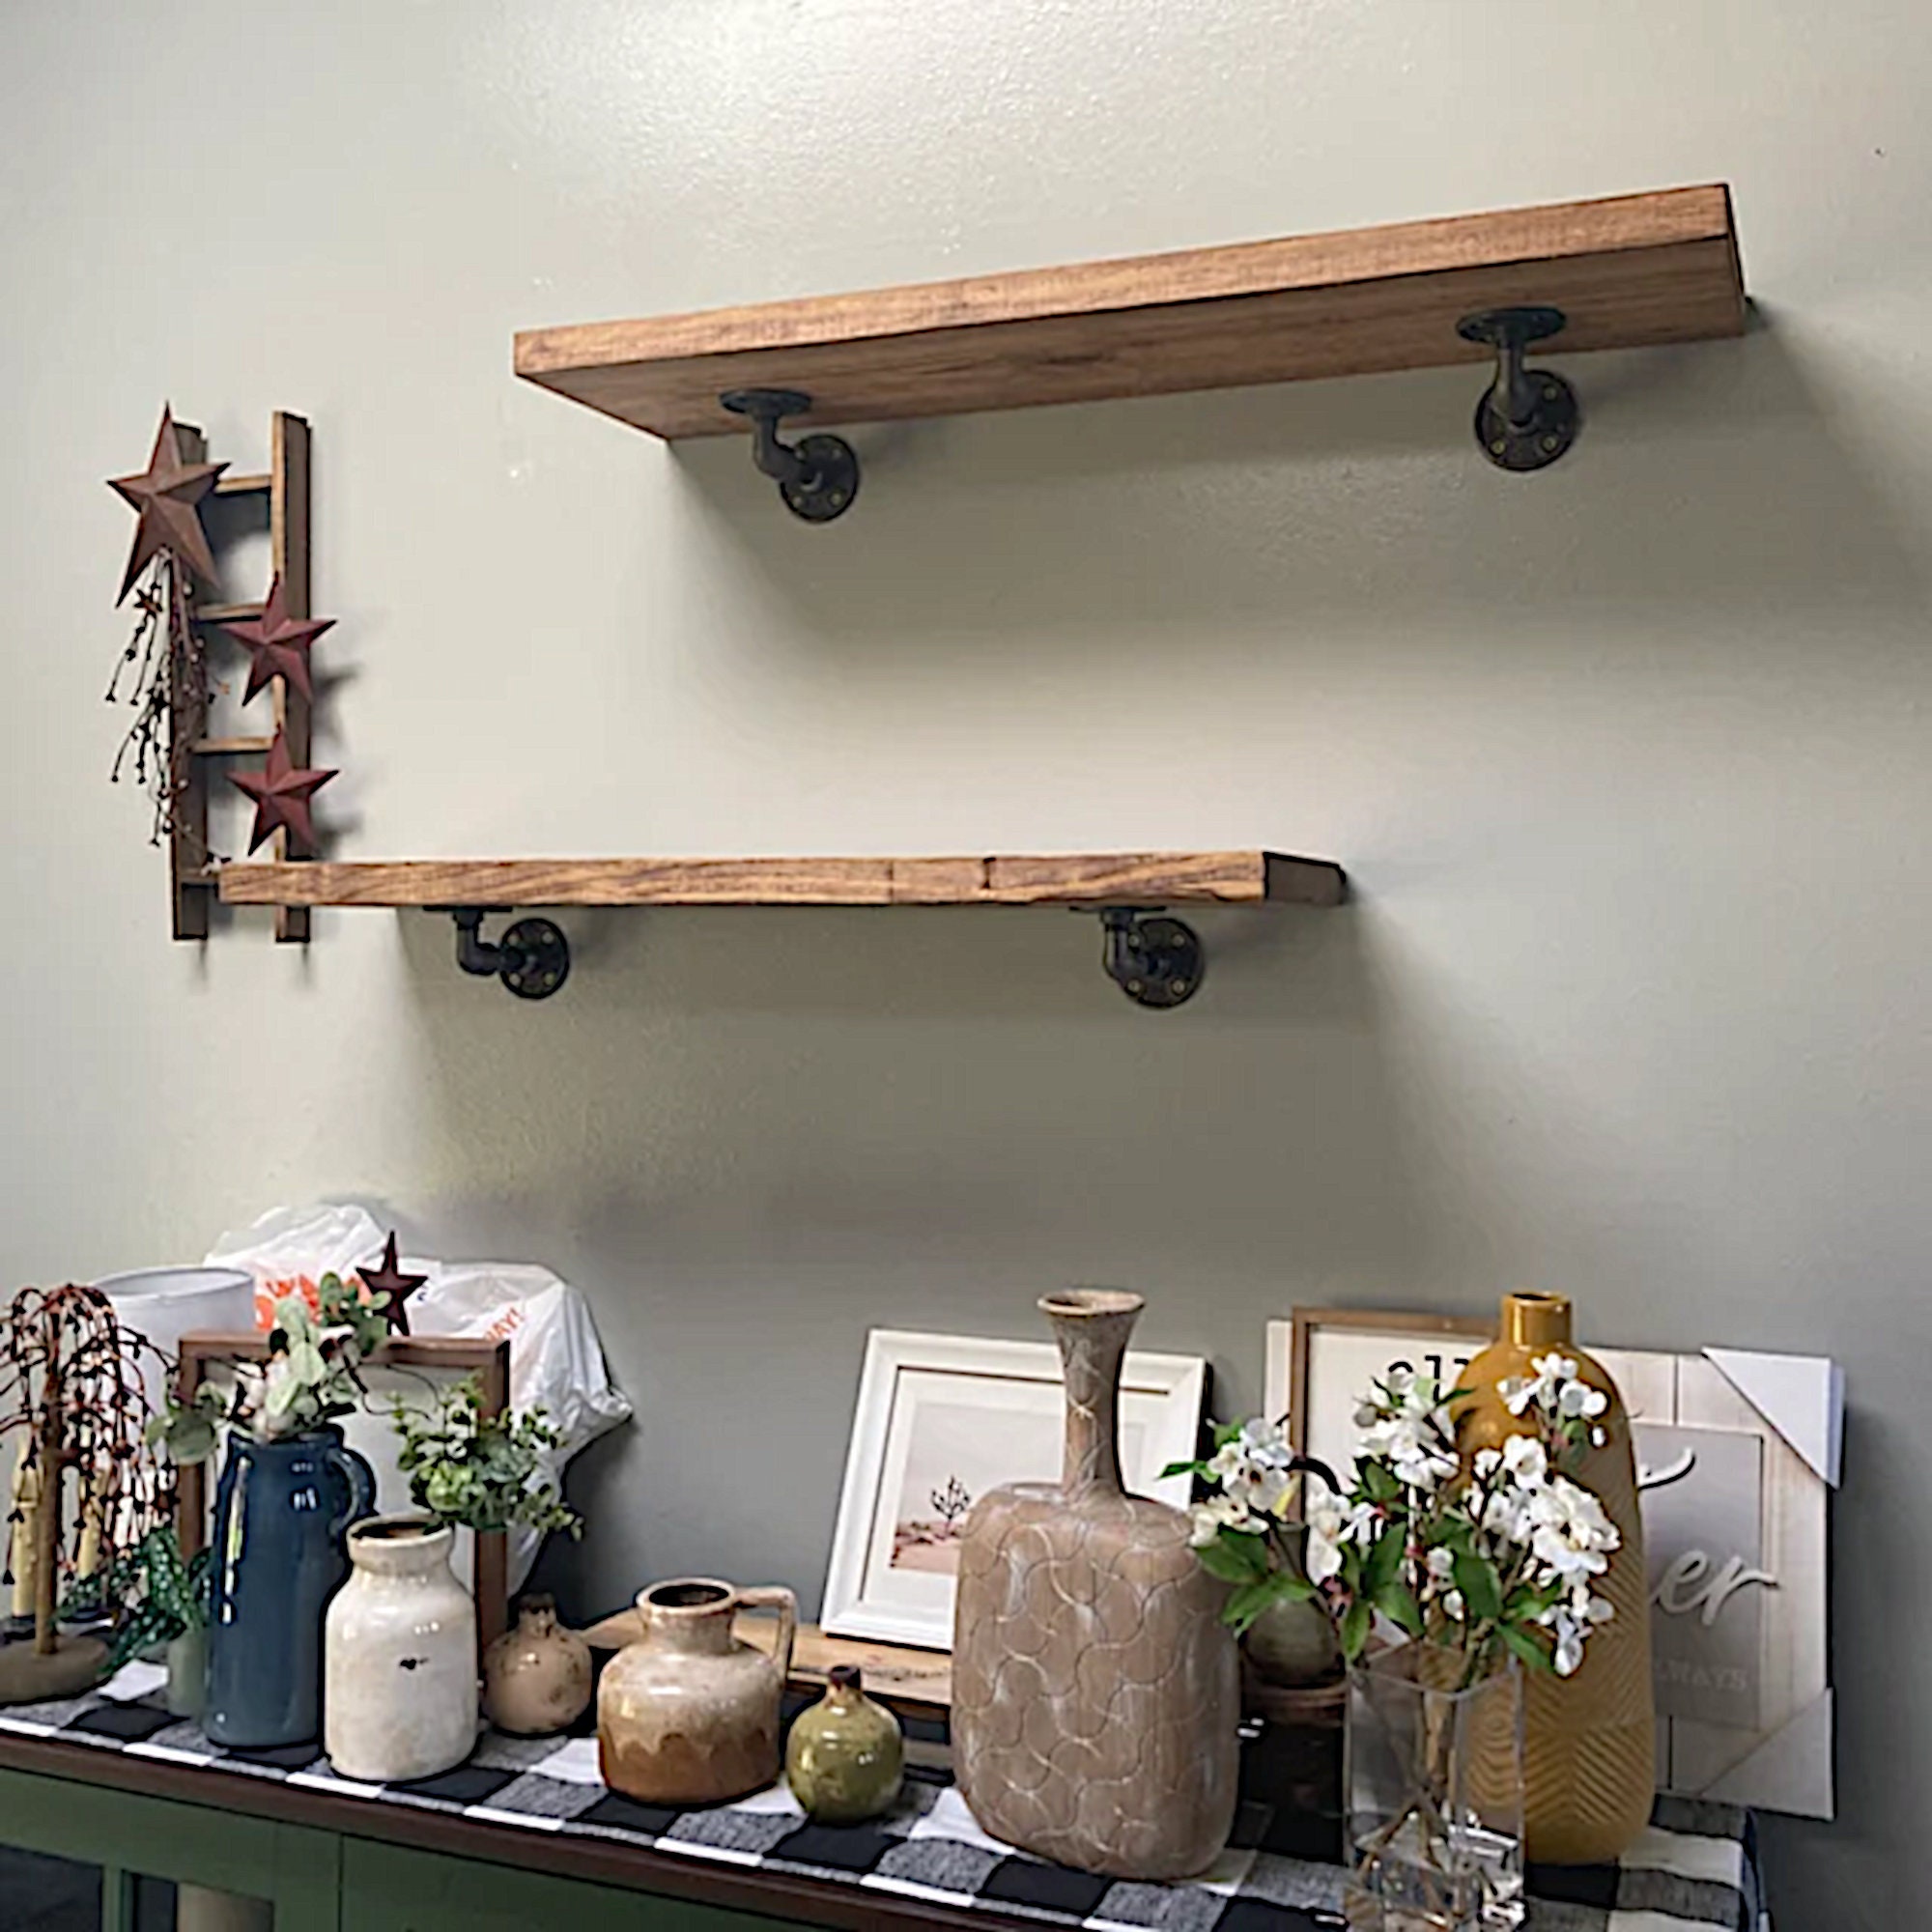 Details about   Rustic Industrial Metal Wood Wall Floating Shelf Storage Display Rack Home Decor 